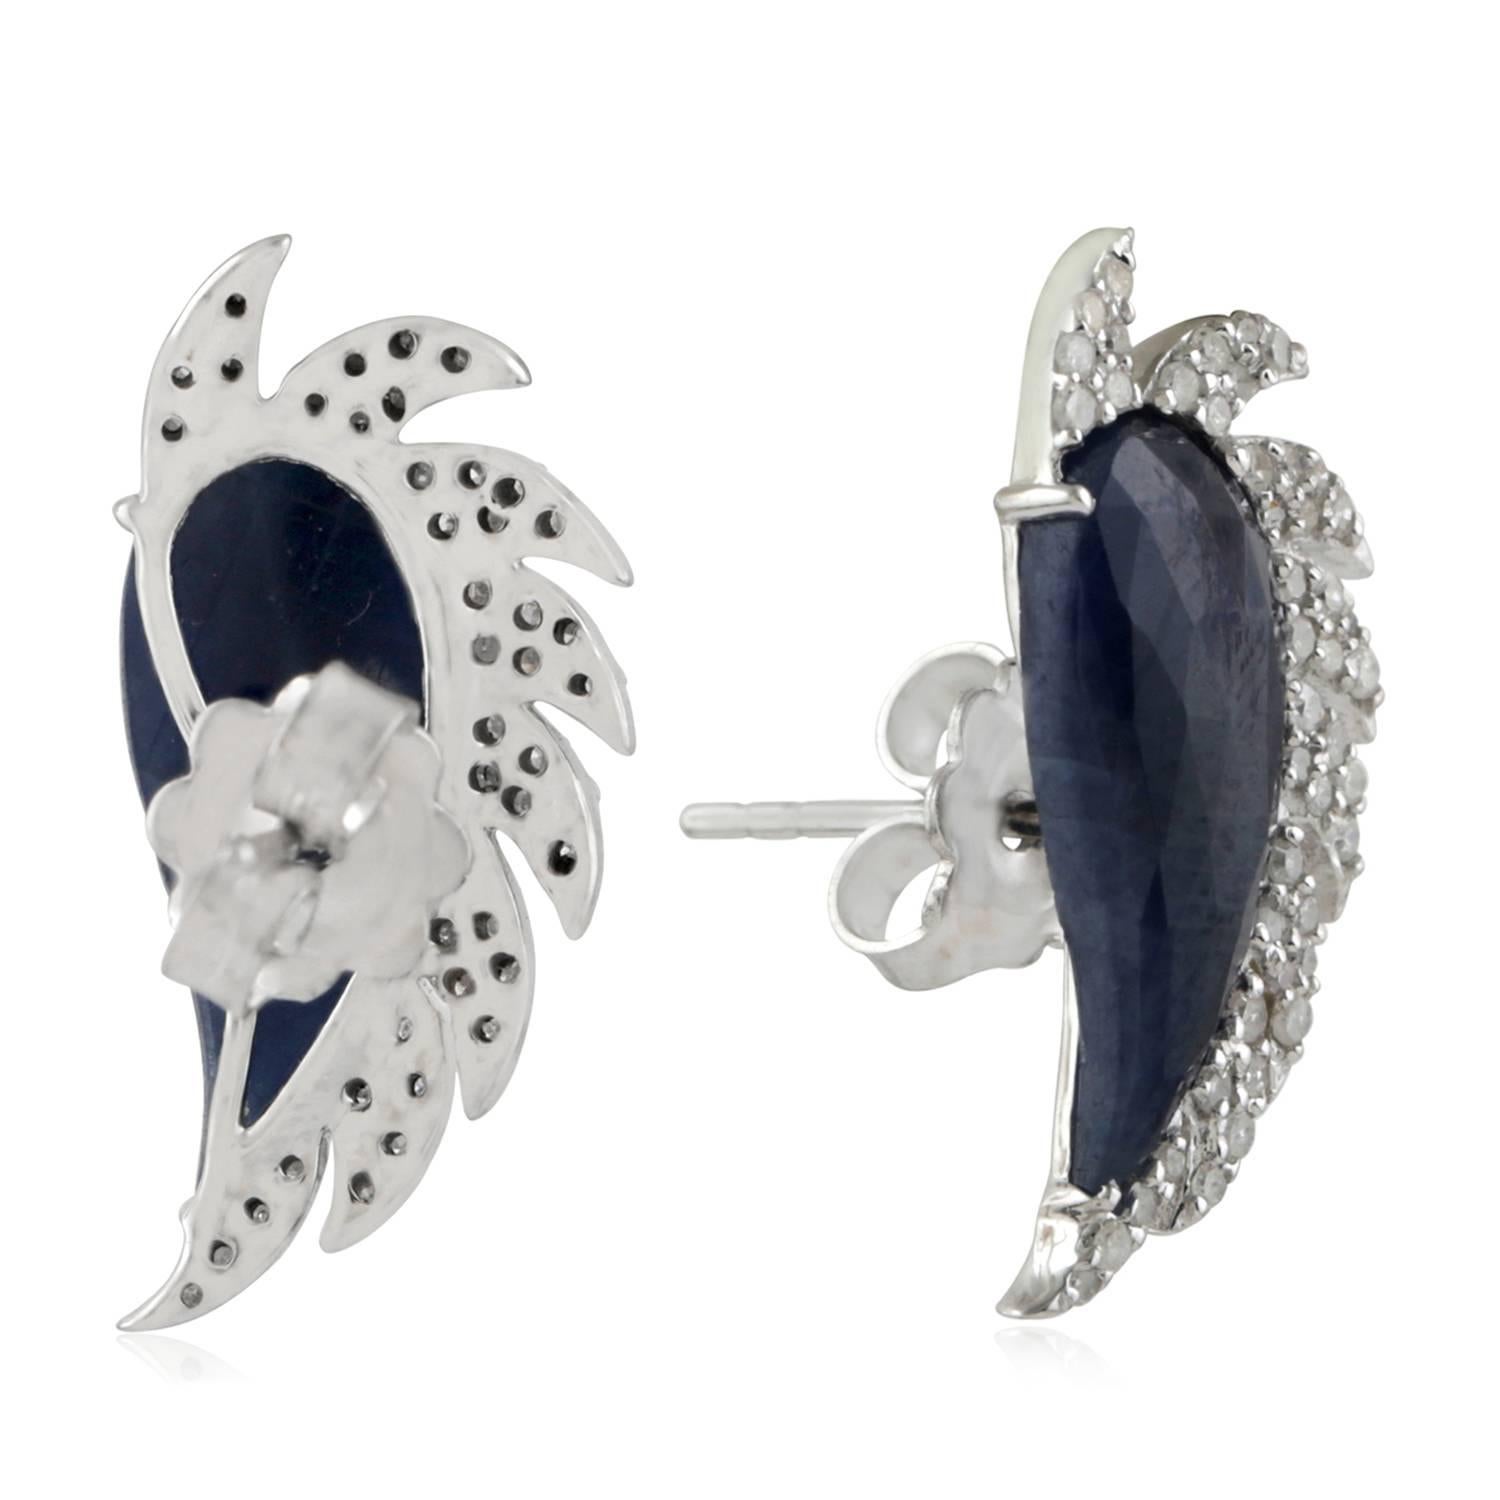 These distinctive stud earrings are modern twist to fine jewelry, handcrafted in 14K gold, sterling silver, blue sapphire and diamonds. The iridescent 16.0-ct rose cut blue sapphire is surrounded by 0.67-ct signature diamond pave arches. A fusion